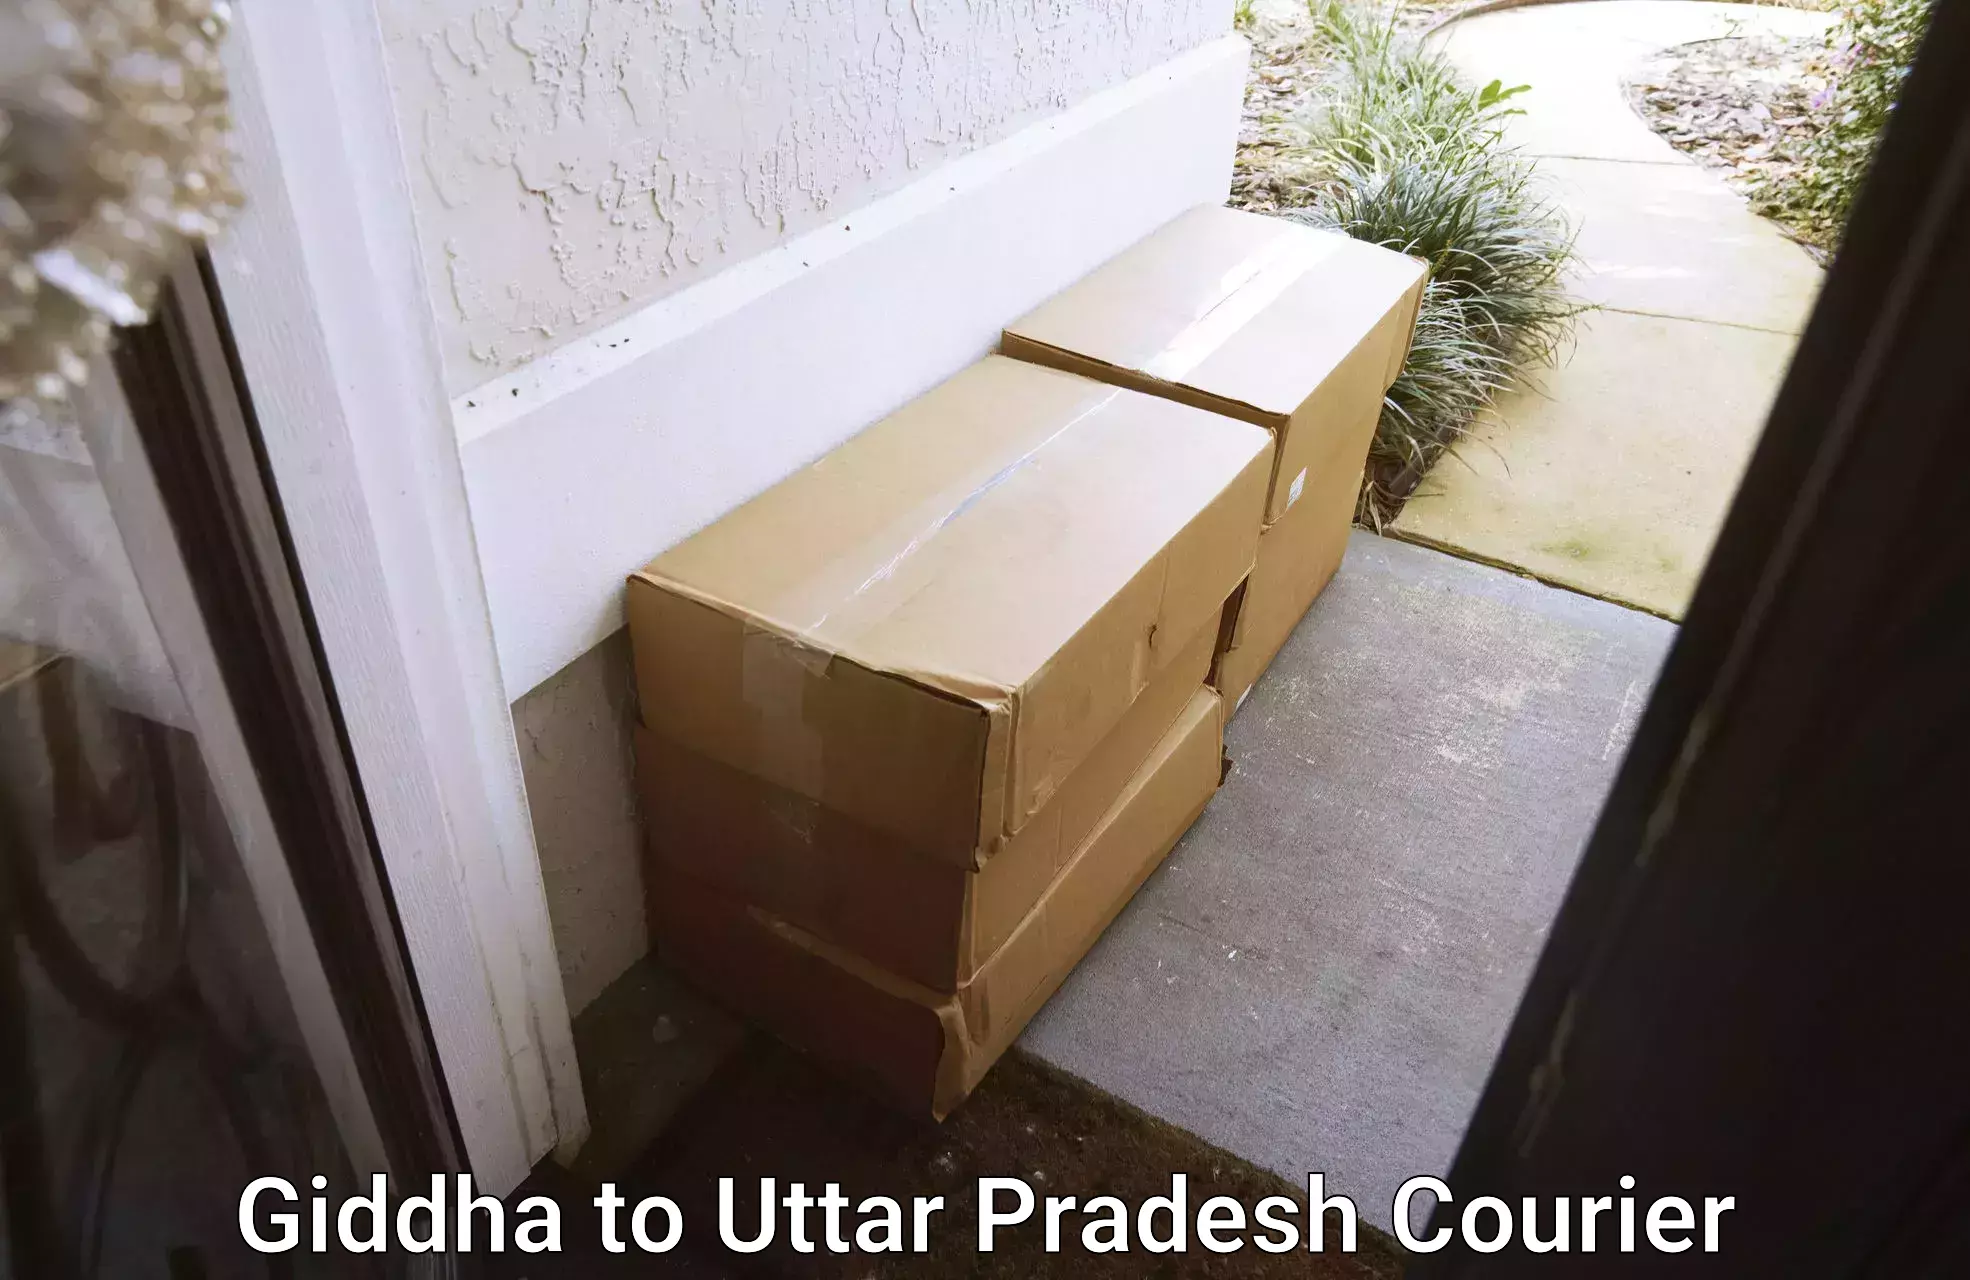 Packing and moving services Giddha to Saharanpur